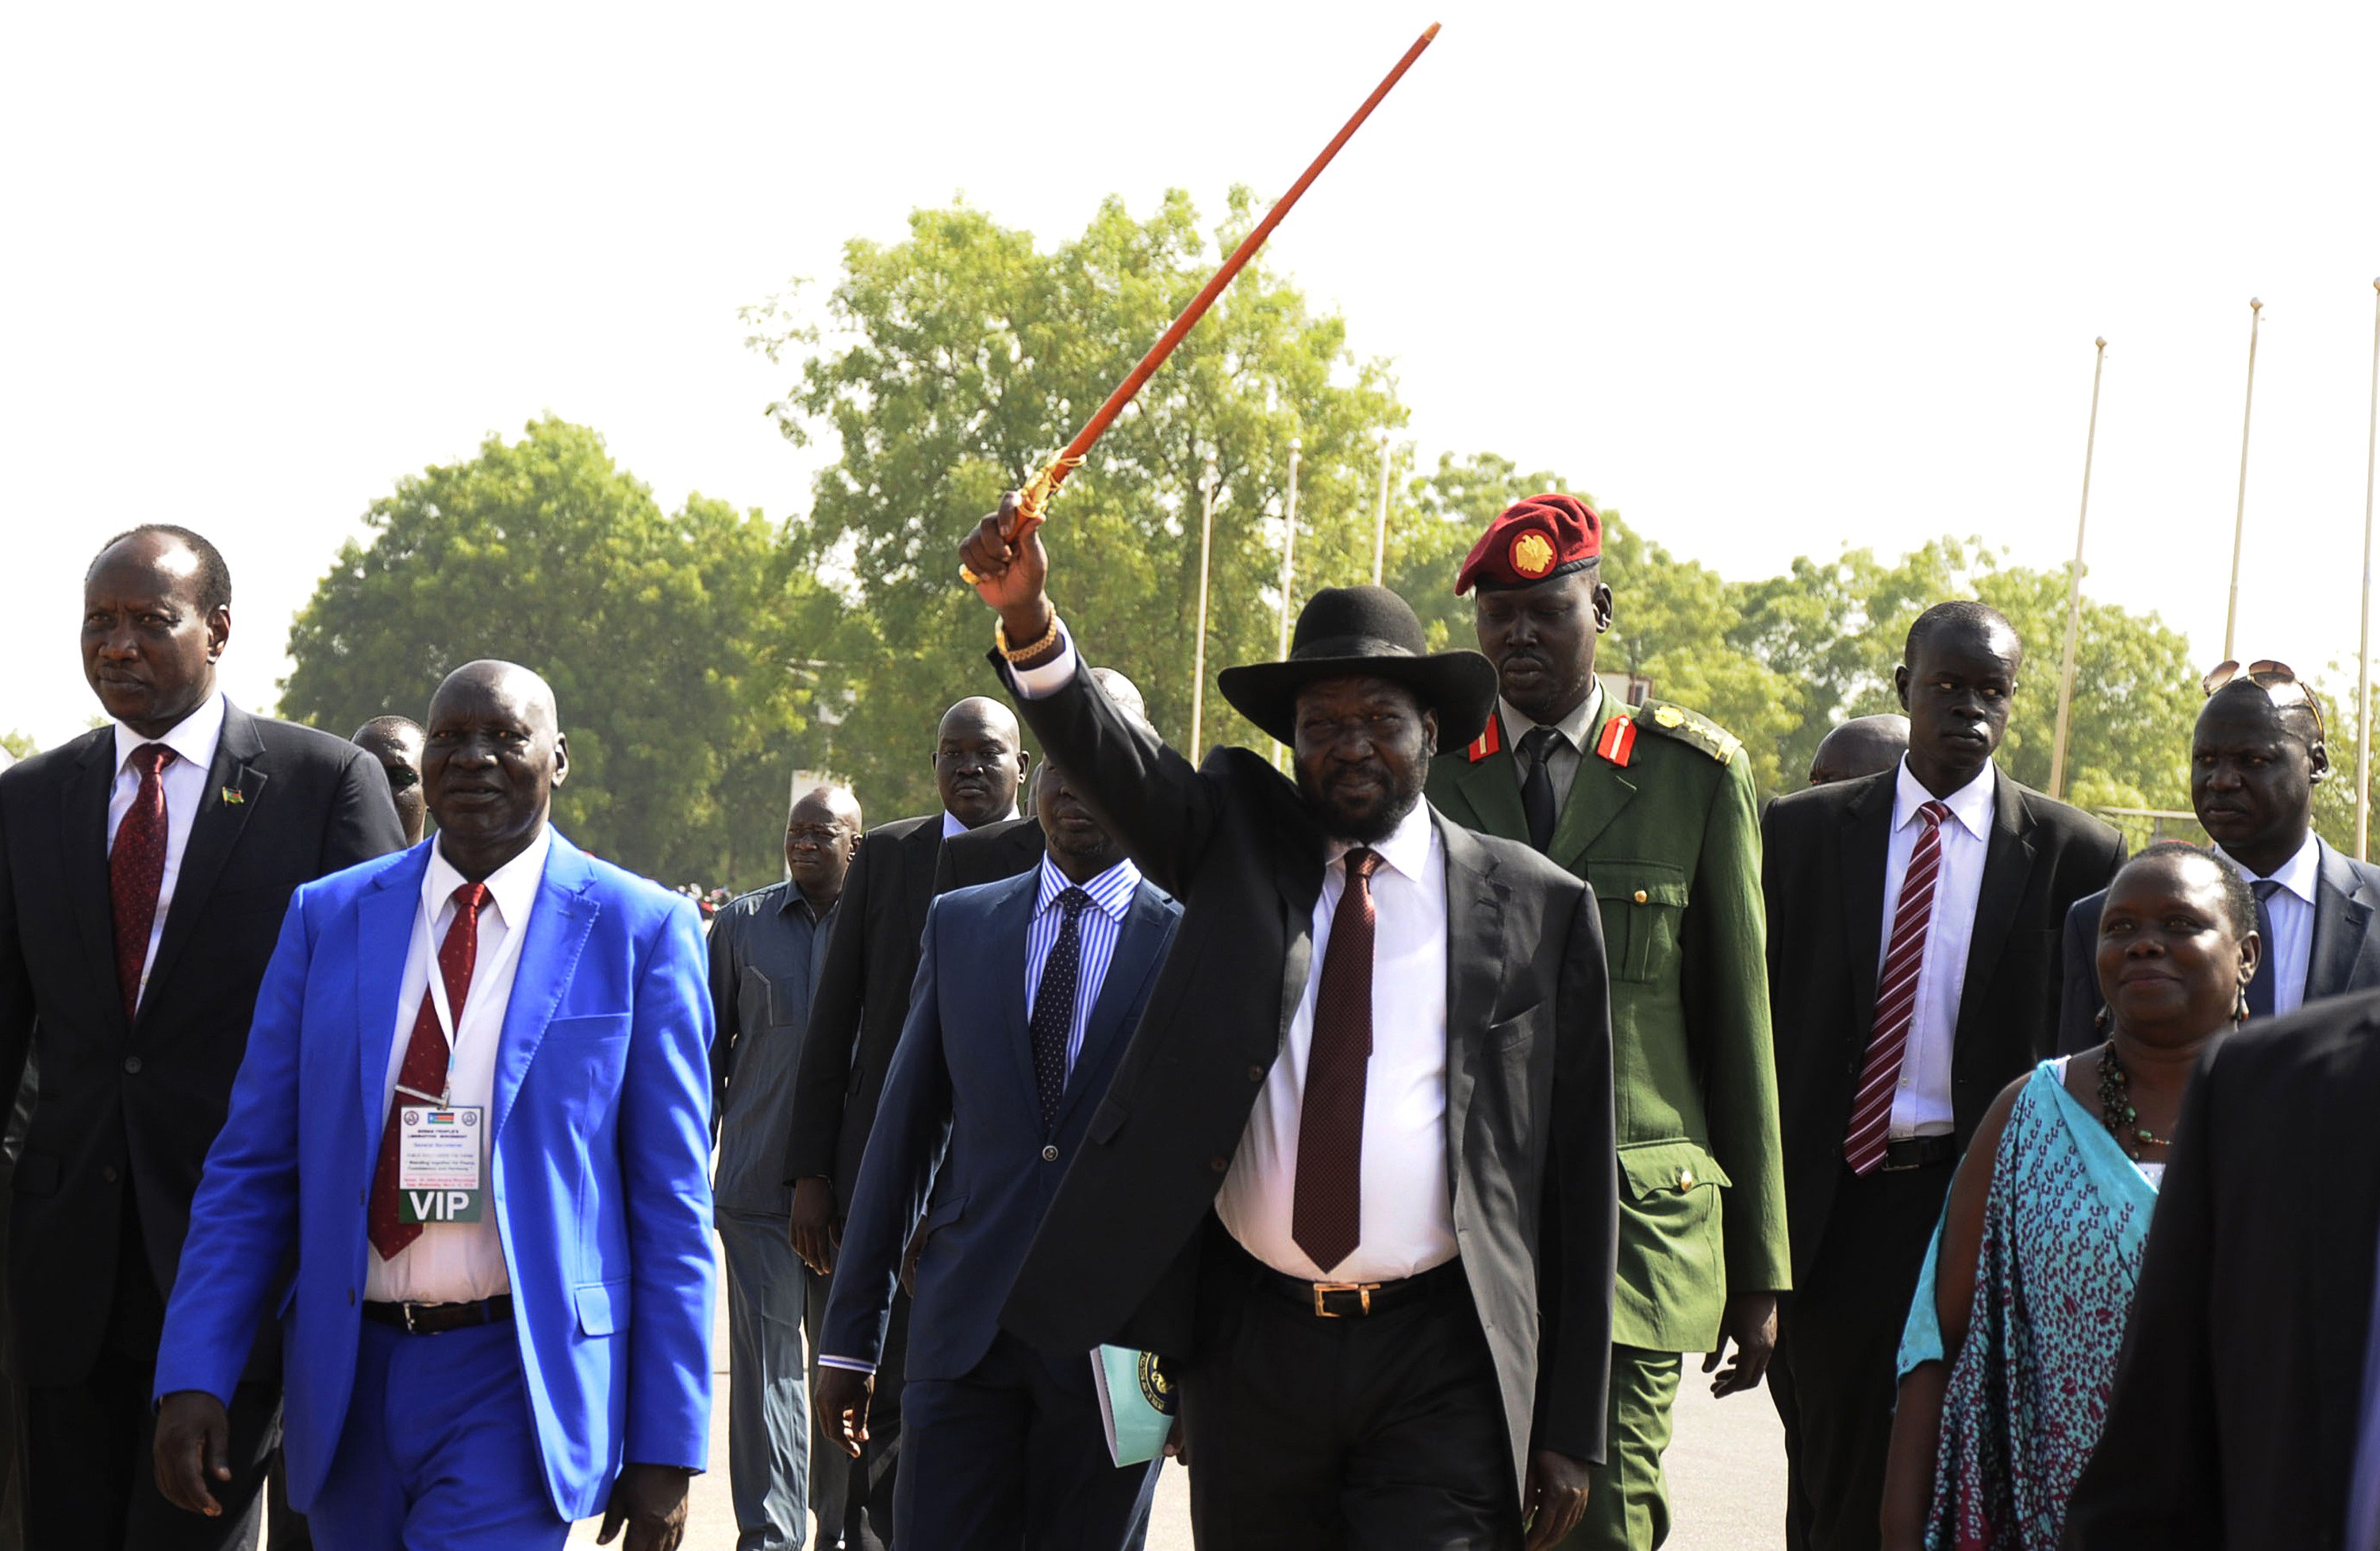 South Sudan's President Salva Kiir (C) acknowledges his supporters as he arrives to address a rally at John Garang's Mausoleum in the capital Juba March 18, 2015.